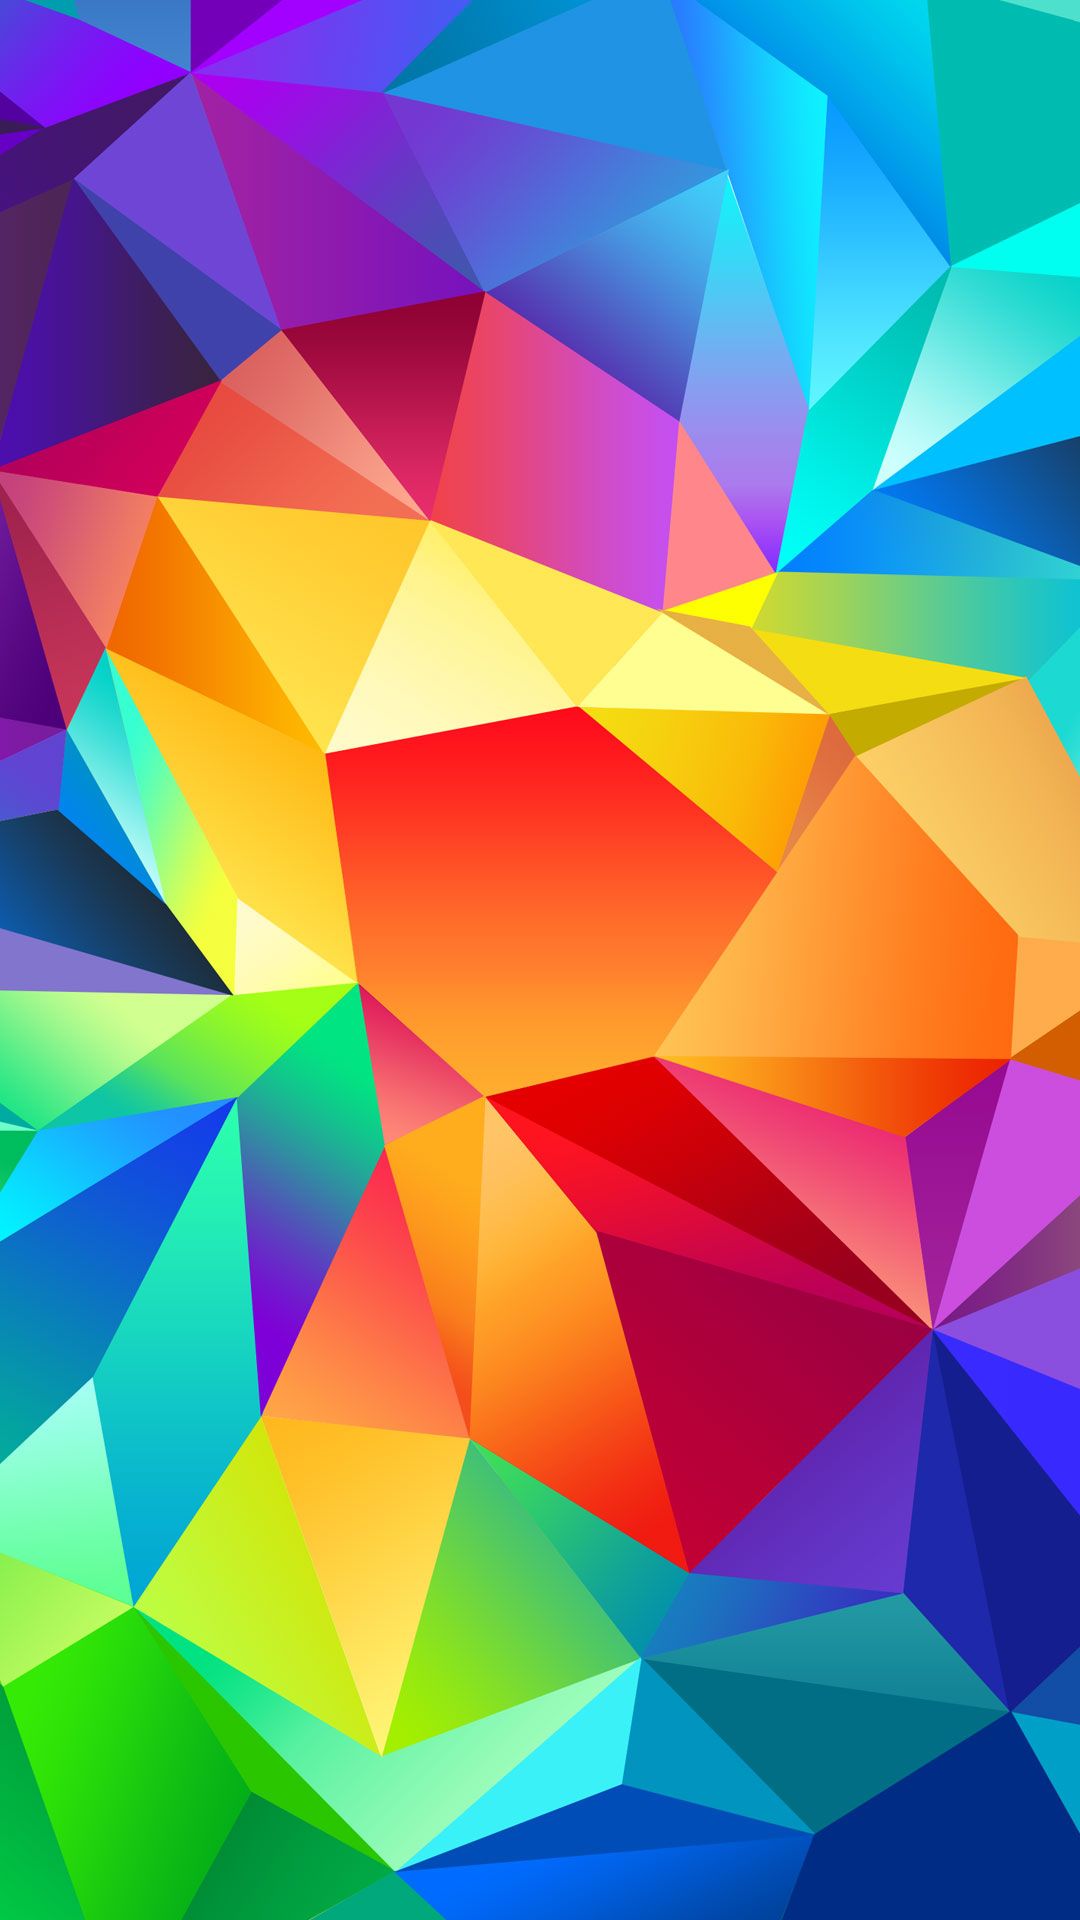 wallpaper easy: Colorful Backgrounds For Iphone